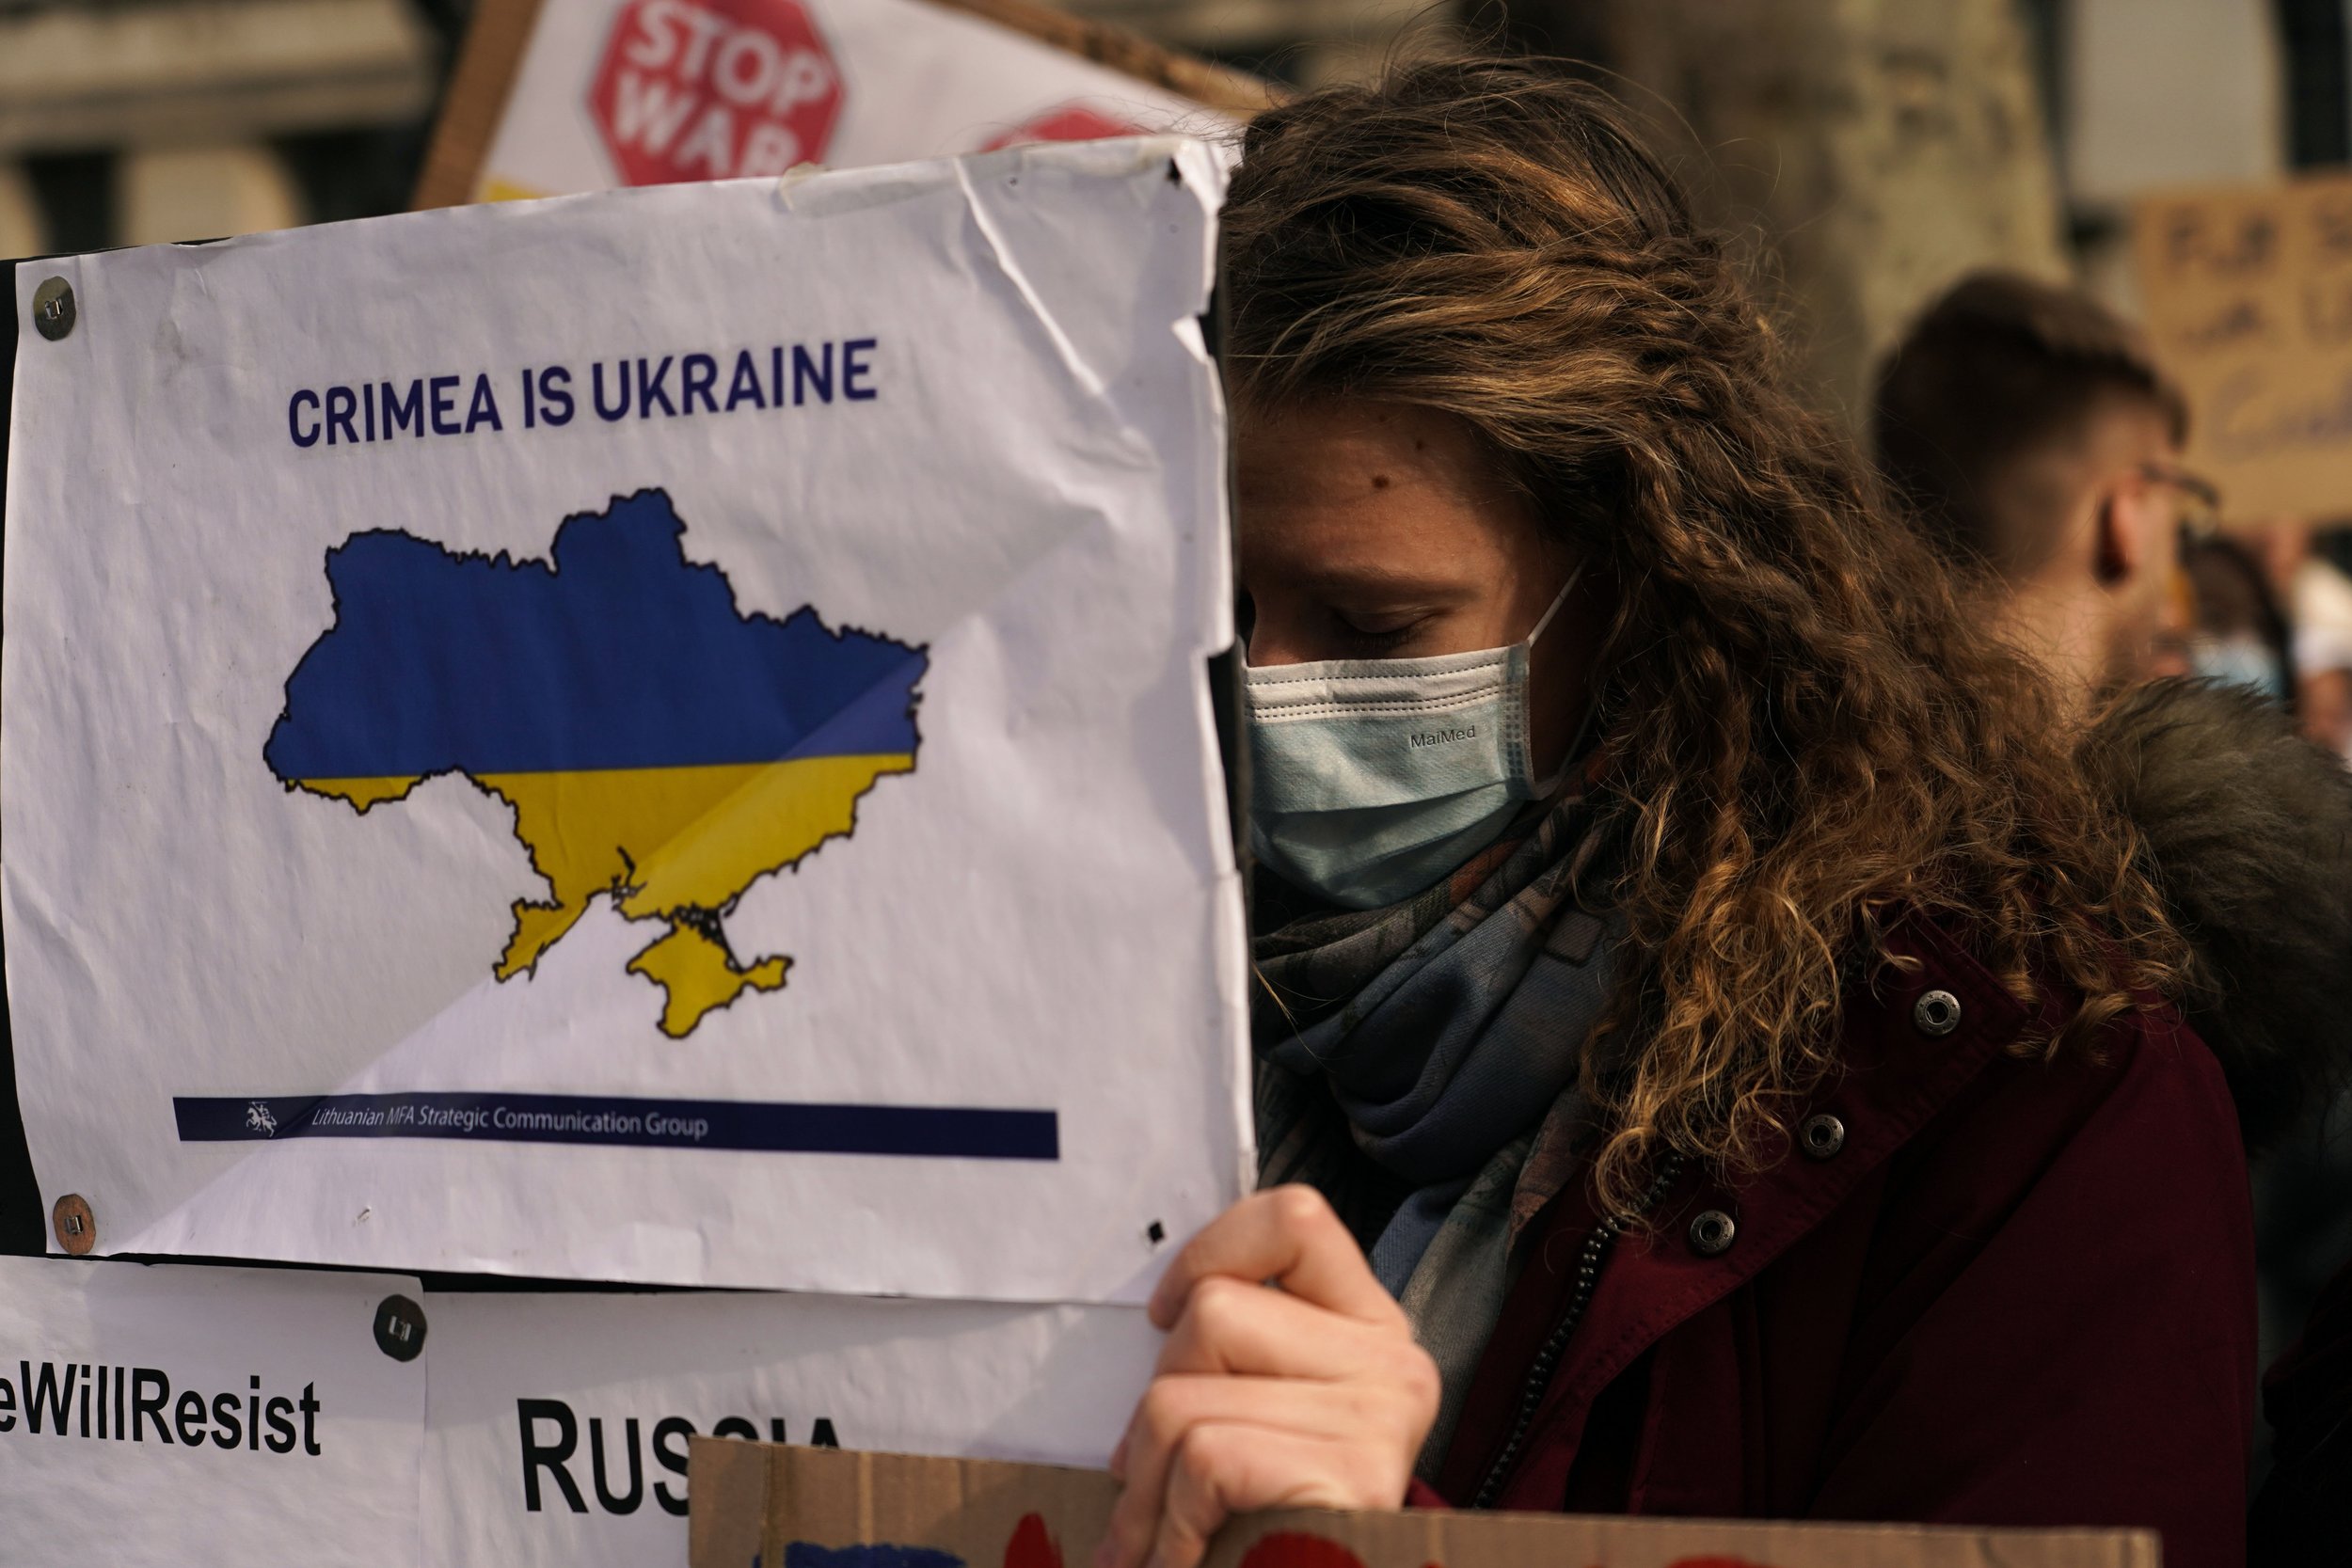  A Pro-Ukraine demonstrator holds a placard as she attends a demonstration outside Downing Street, in London, Thursday, Feb. 24, 2022.  (AP Photo/Alberto Pezzali) 